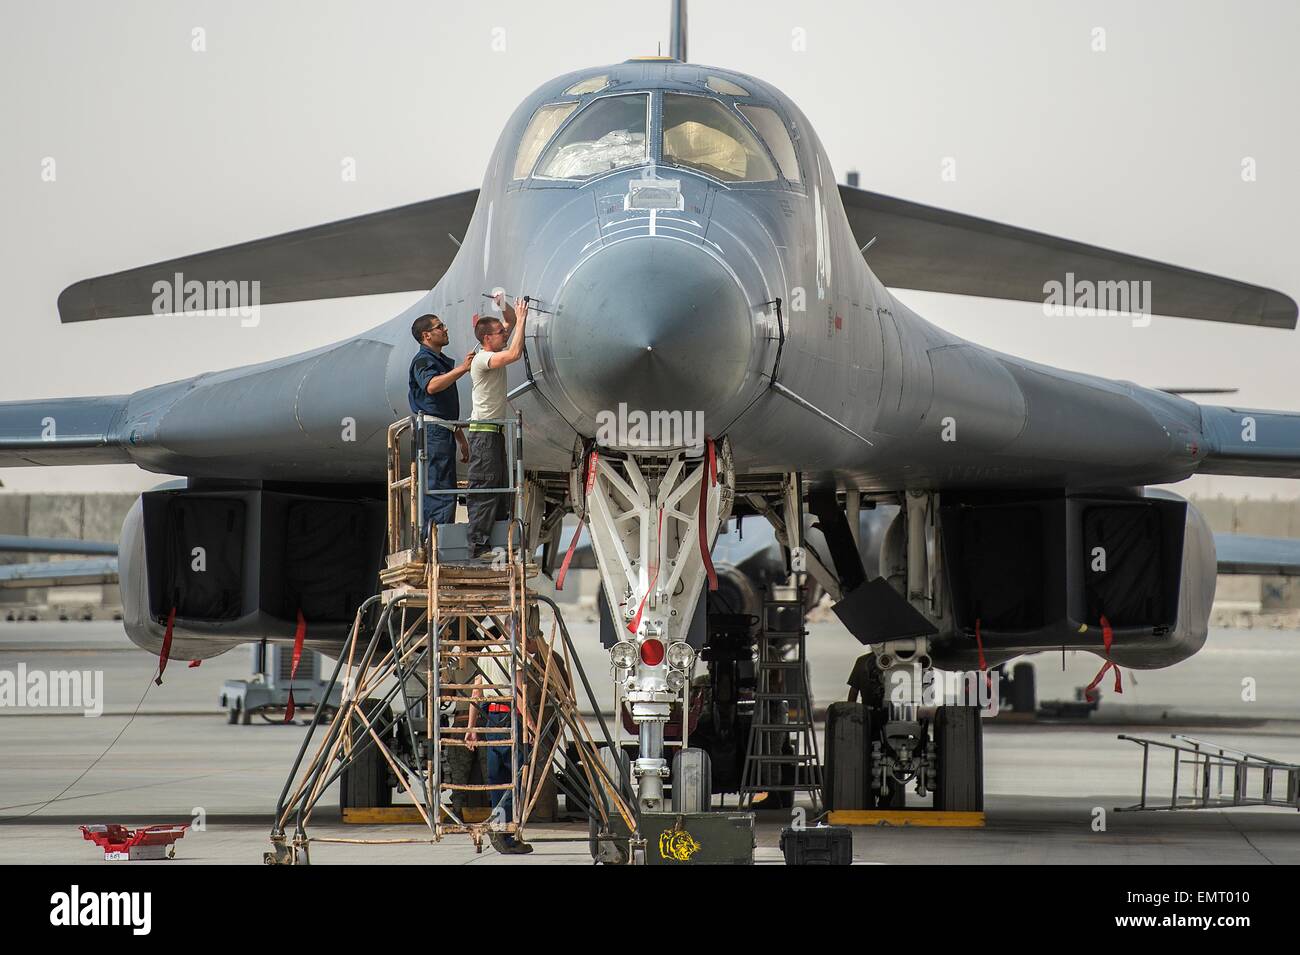 A US Air Force crew chiefs prepare a B-1B Lancer stealth bomber for a mission against Islamic State fighters at Al Udeid Airbase April 8, 2015 in Qatar. Stock Photo